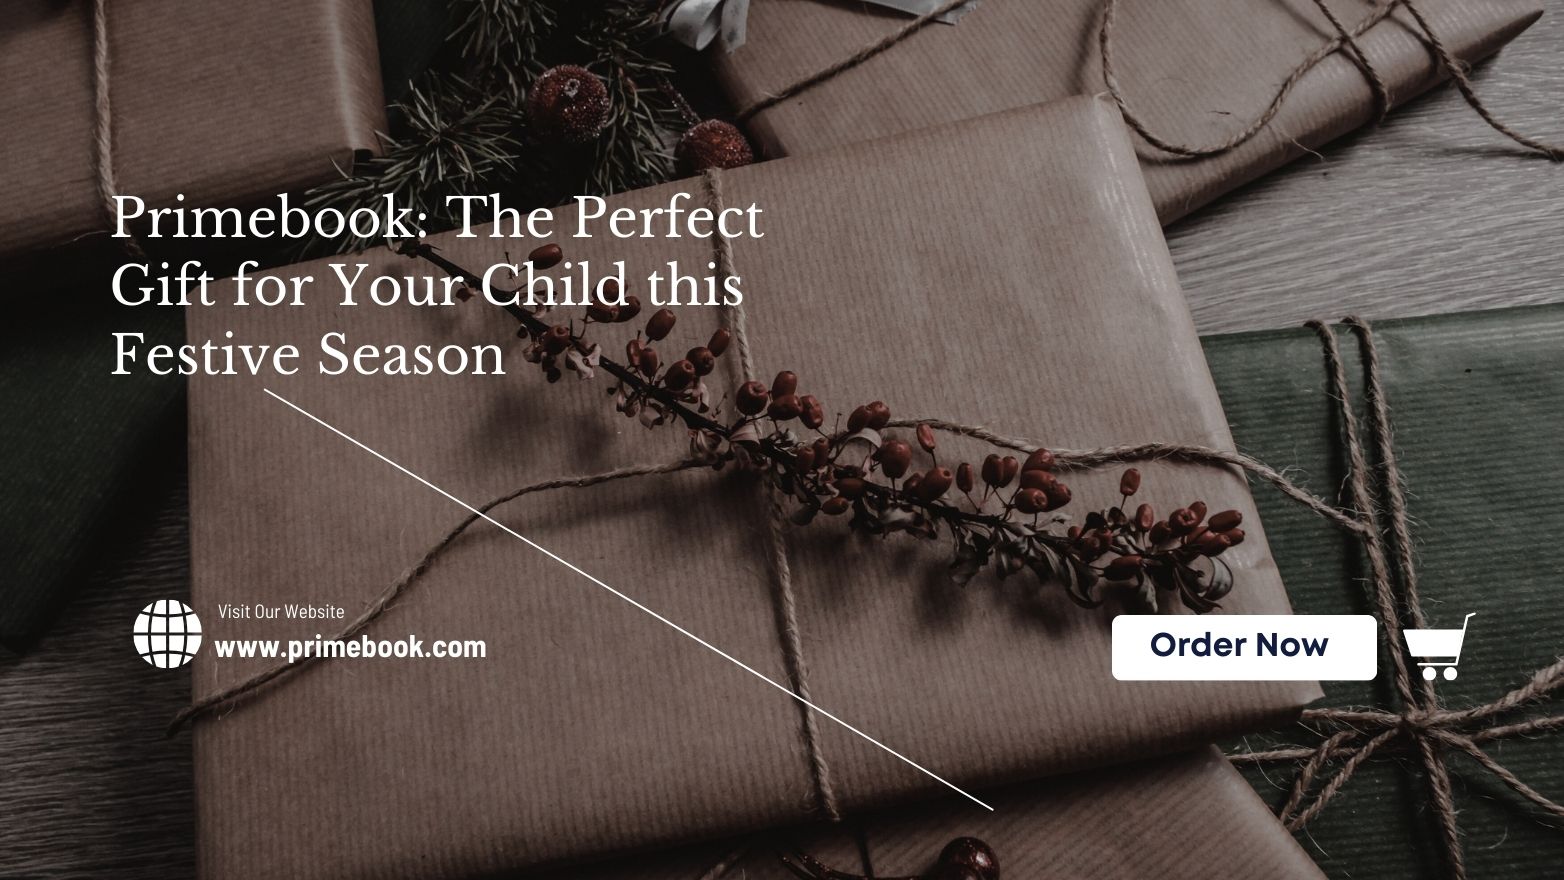 Primebook: The Perfect Gift for Your Child this Festive Season